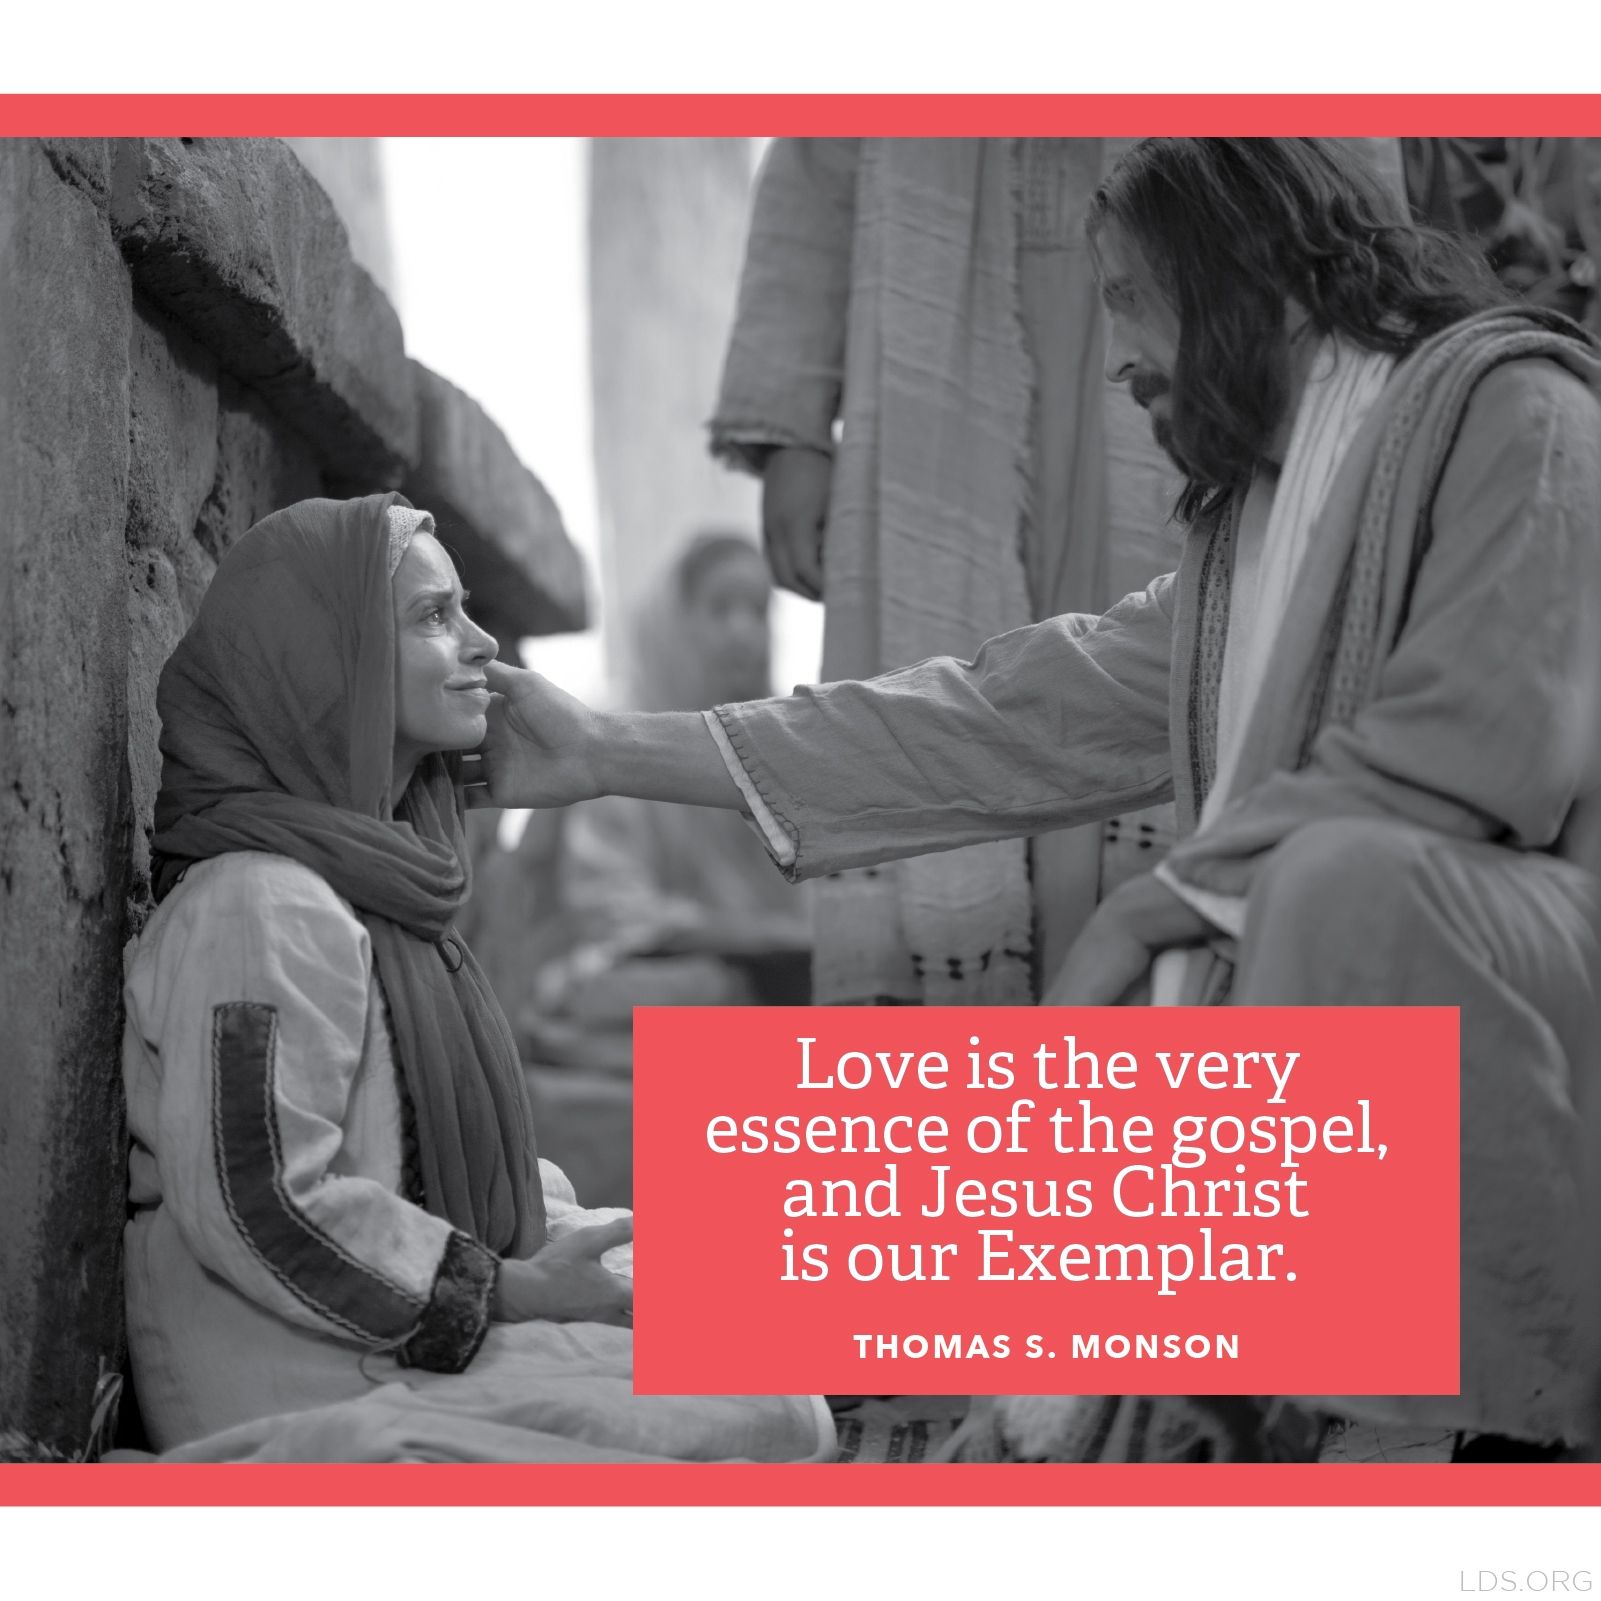 “Love is the very essence of the gospel, and Jesus Christ is our Exemplar.”—President Thomas S. Monson, “Love—the Essence of the Gospel.” © undefined ipCode 1.